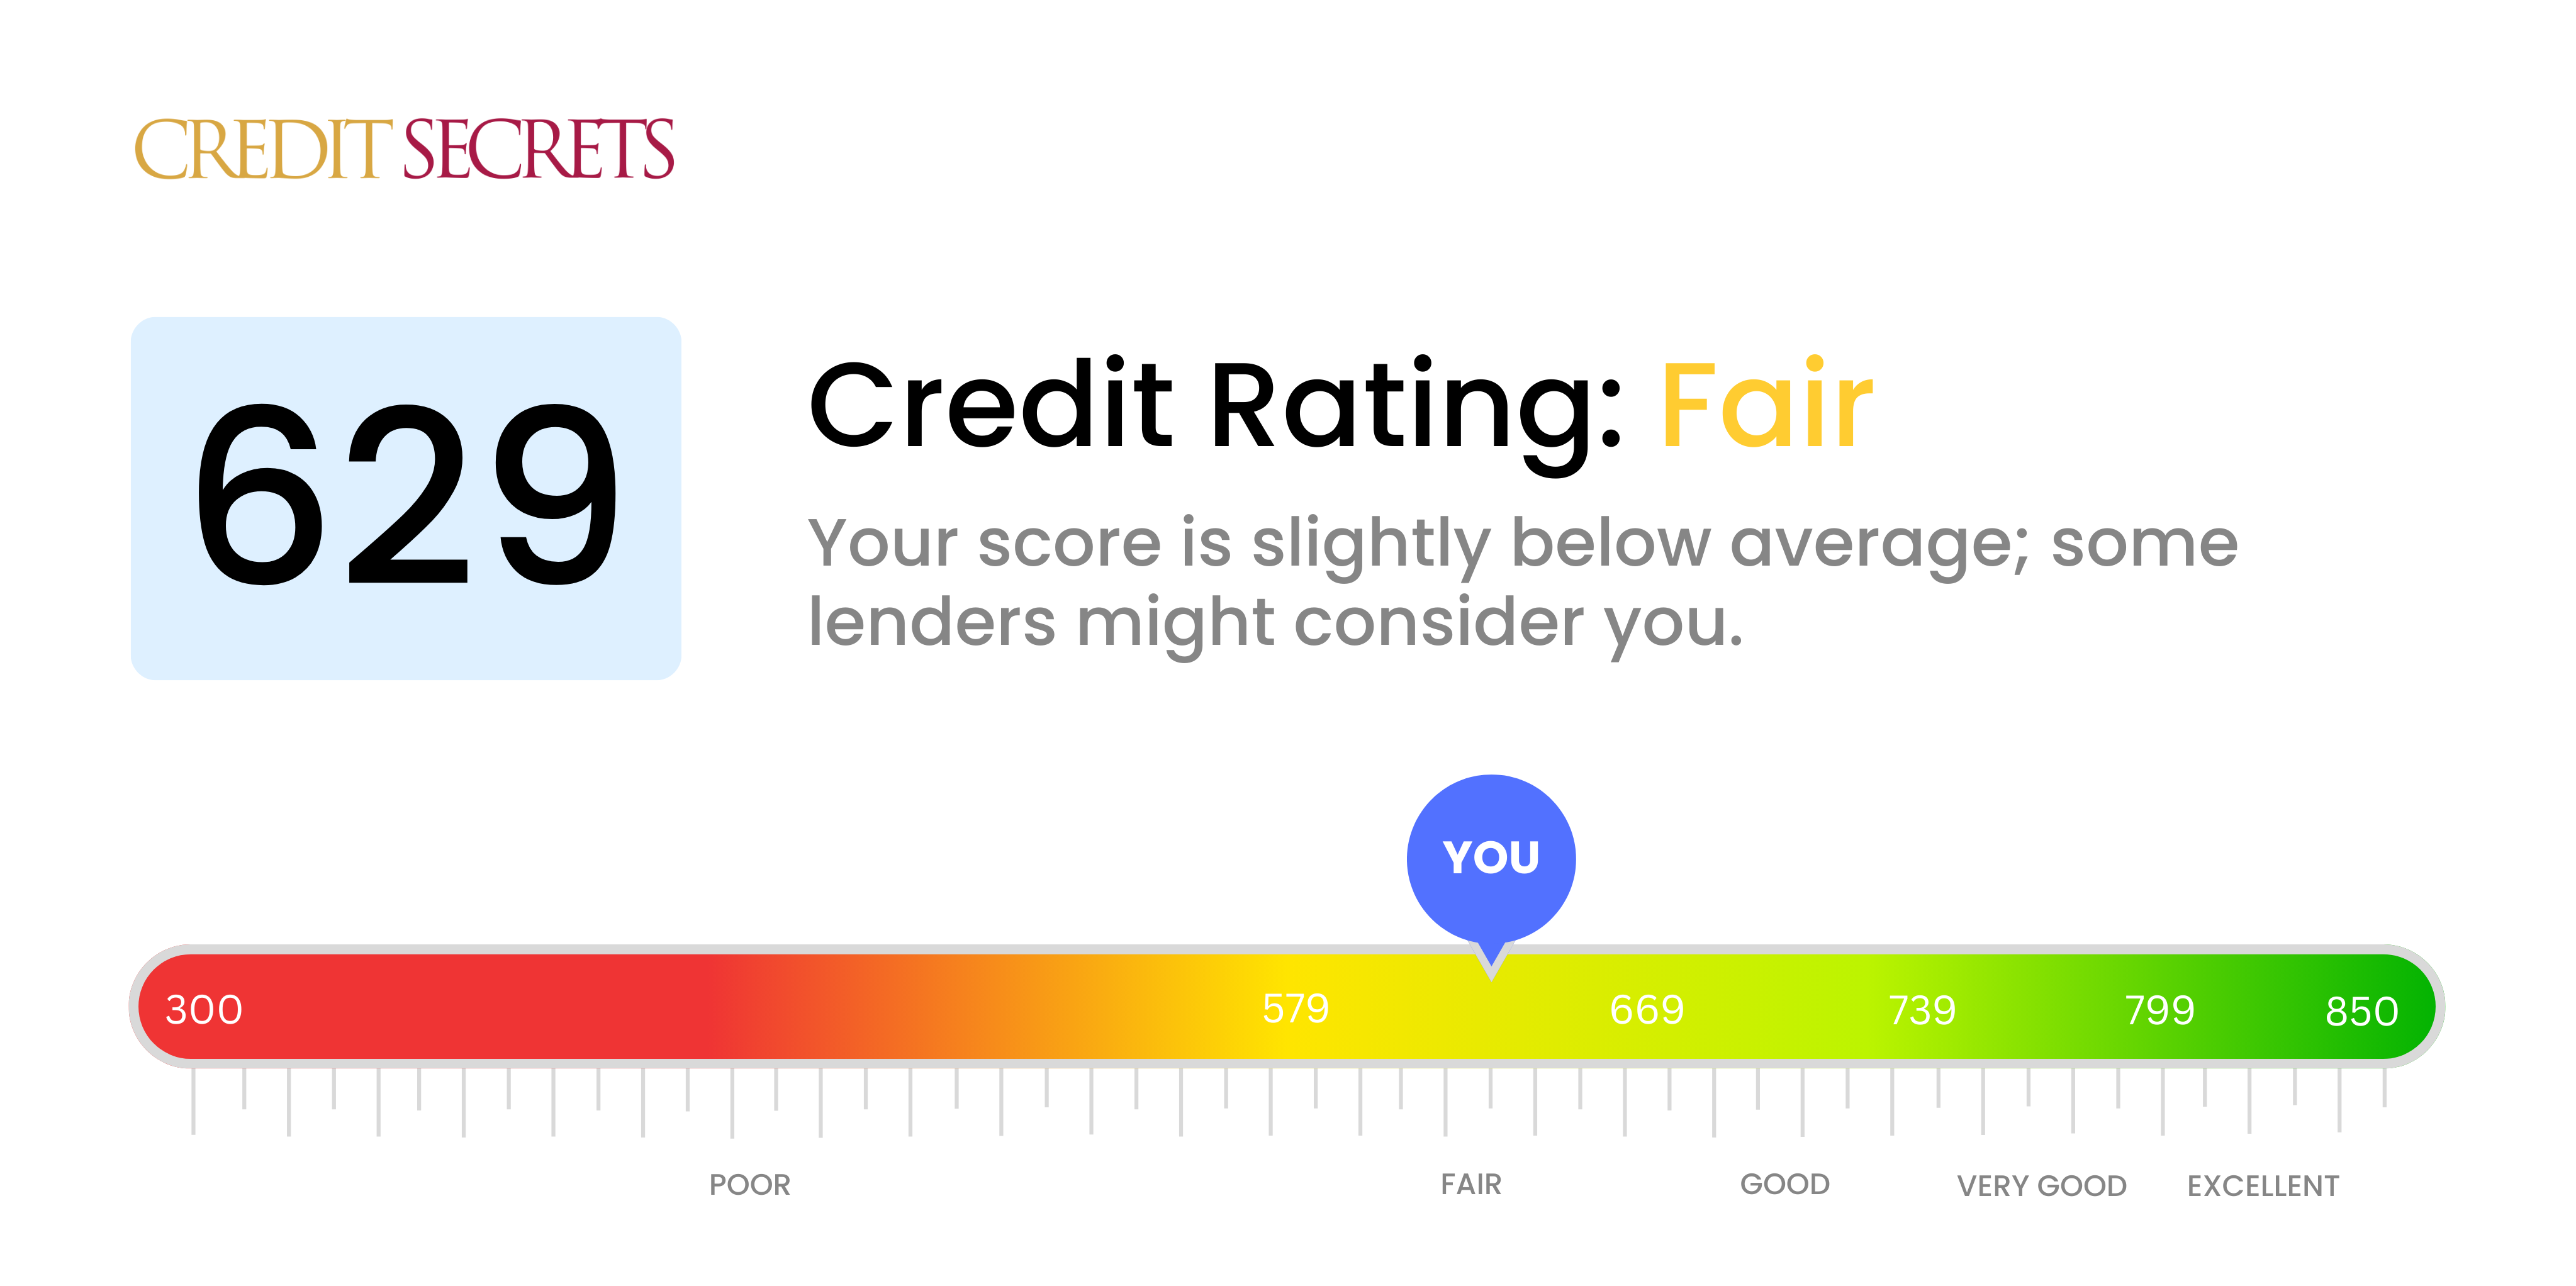 Is 629 a good credit score?